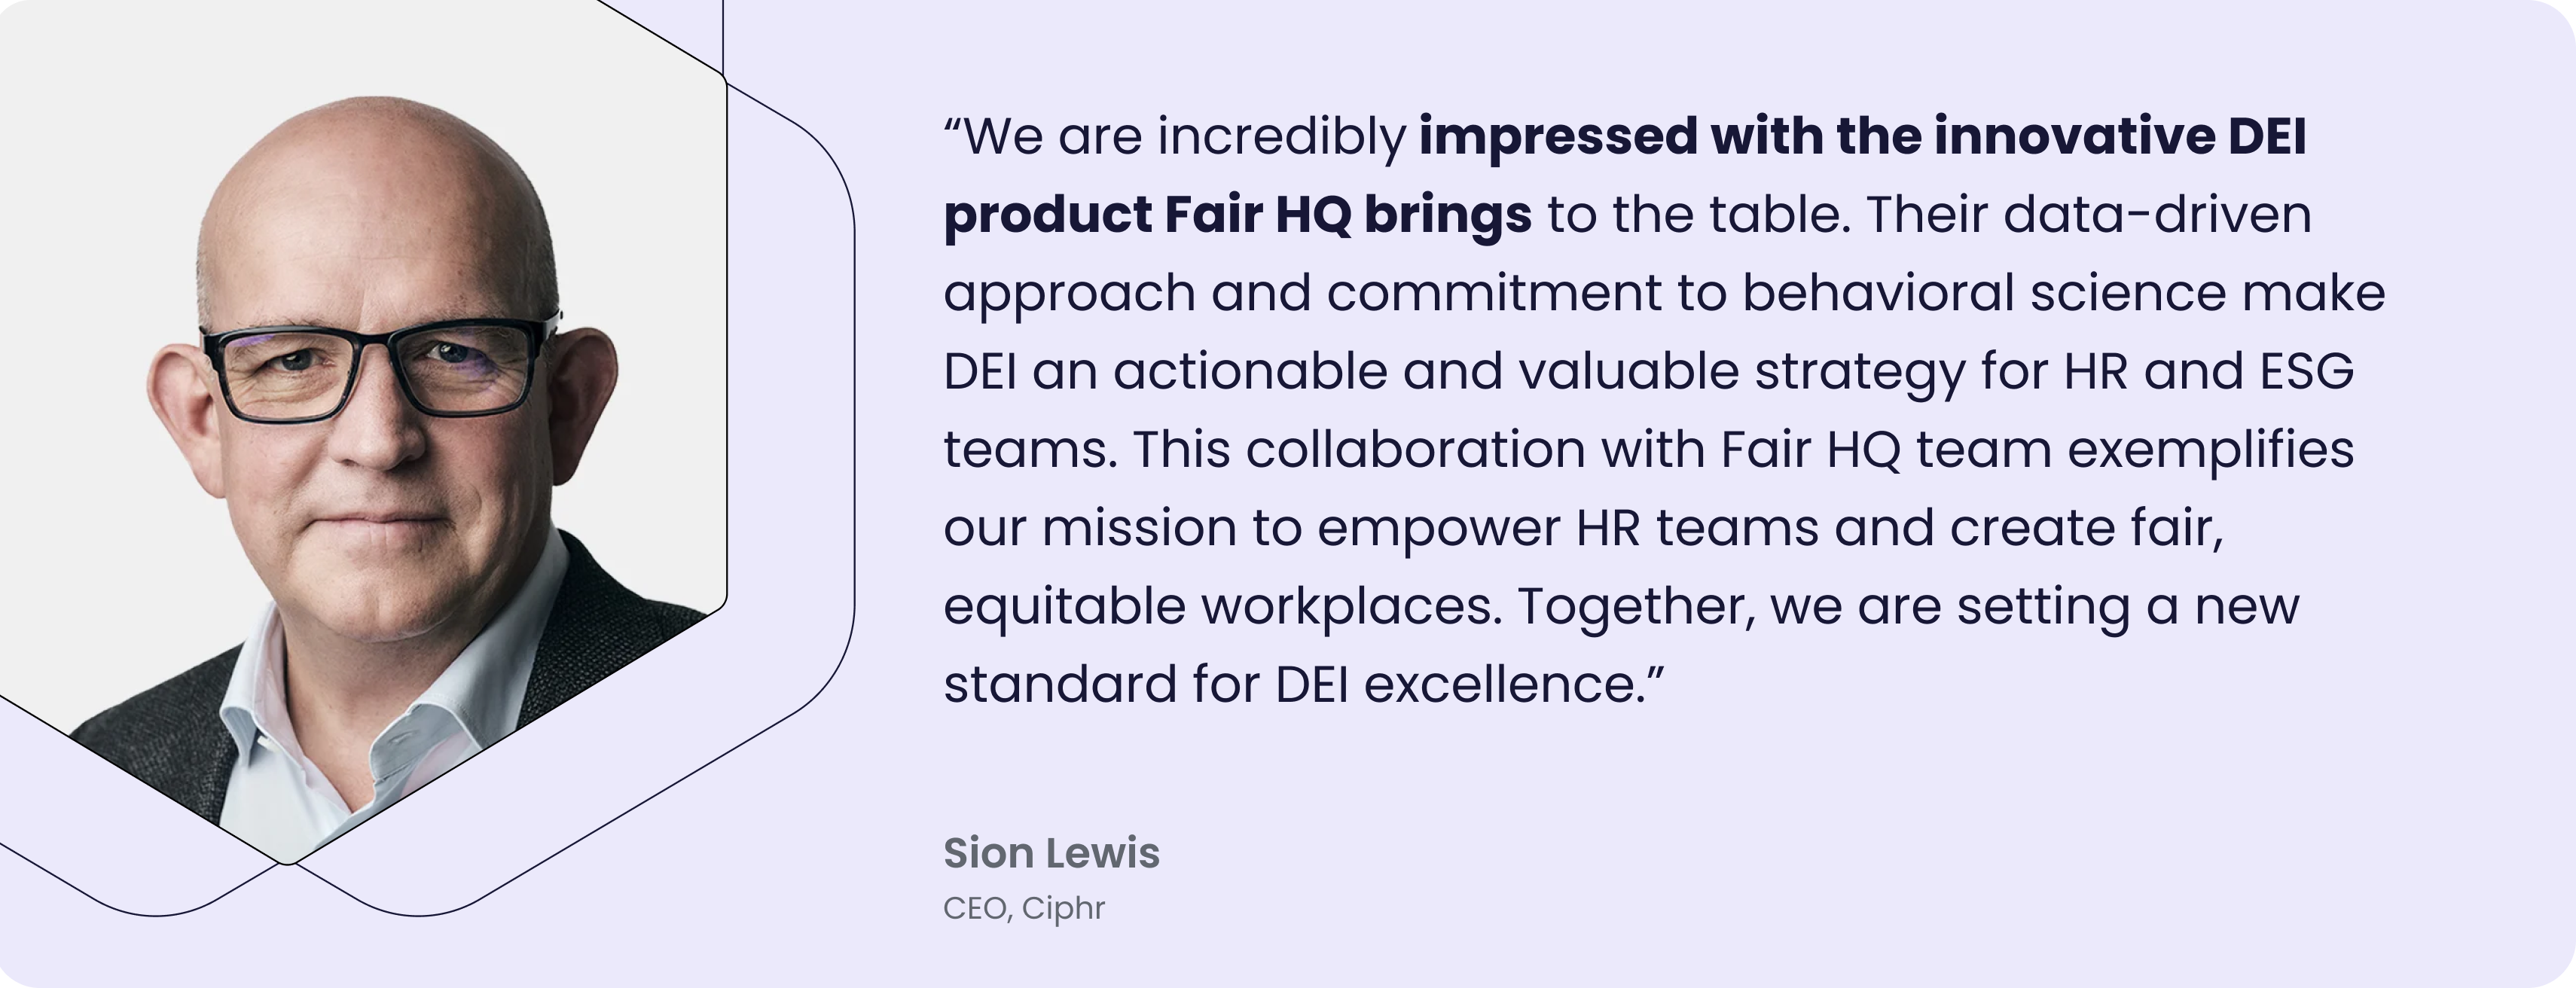 Alt Text: “Image of Sion Lewis, CEO of Ciphr, with a quote: ‘We are incredibly impressed with the innovative DEI product Fair HQ brings to the table. Their data-driven approach and commitment to behavioral science make DEI an actionable and valuable strategy for HR and ESG teams. This collaboration with Fair HQ team exemplifies our mission to empower HR teams and create fair, equitable workplaces. Together, we are setting a new standard for DEI excellence.’”